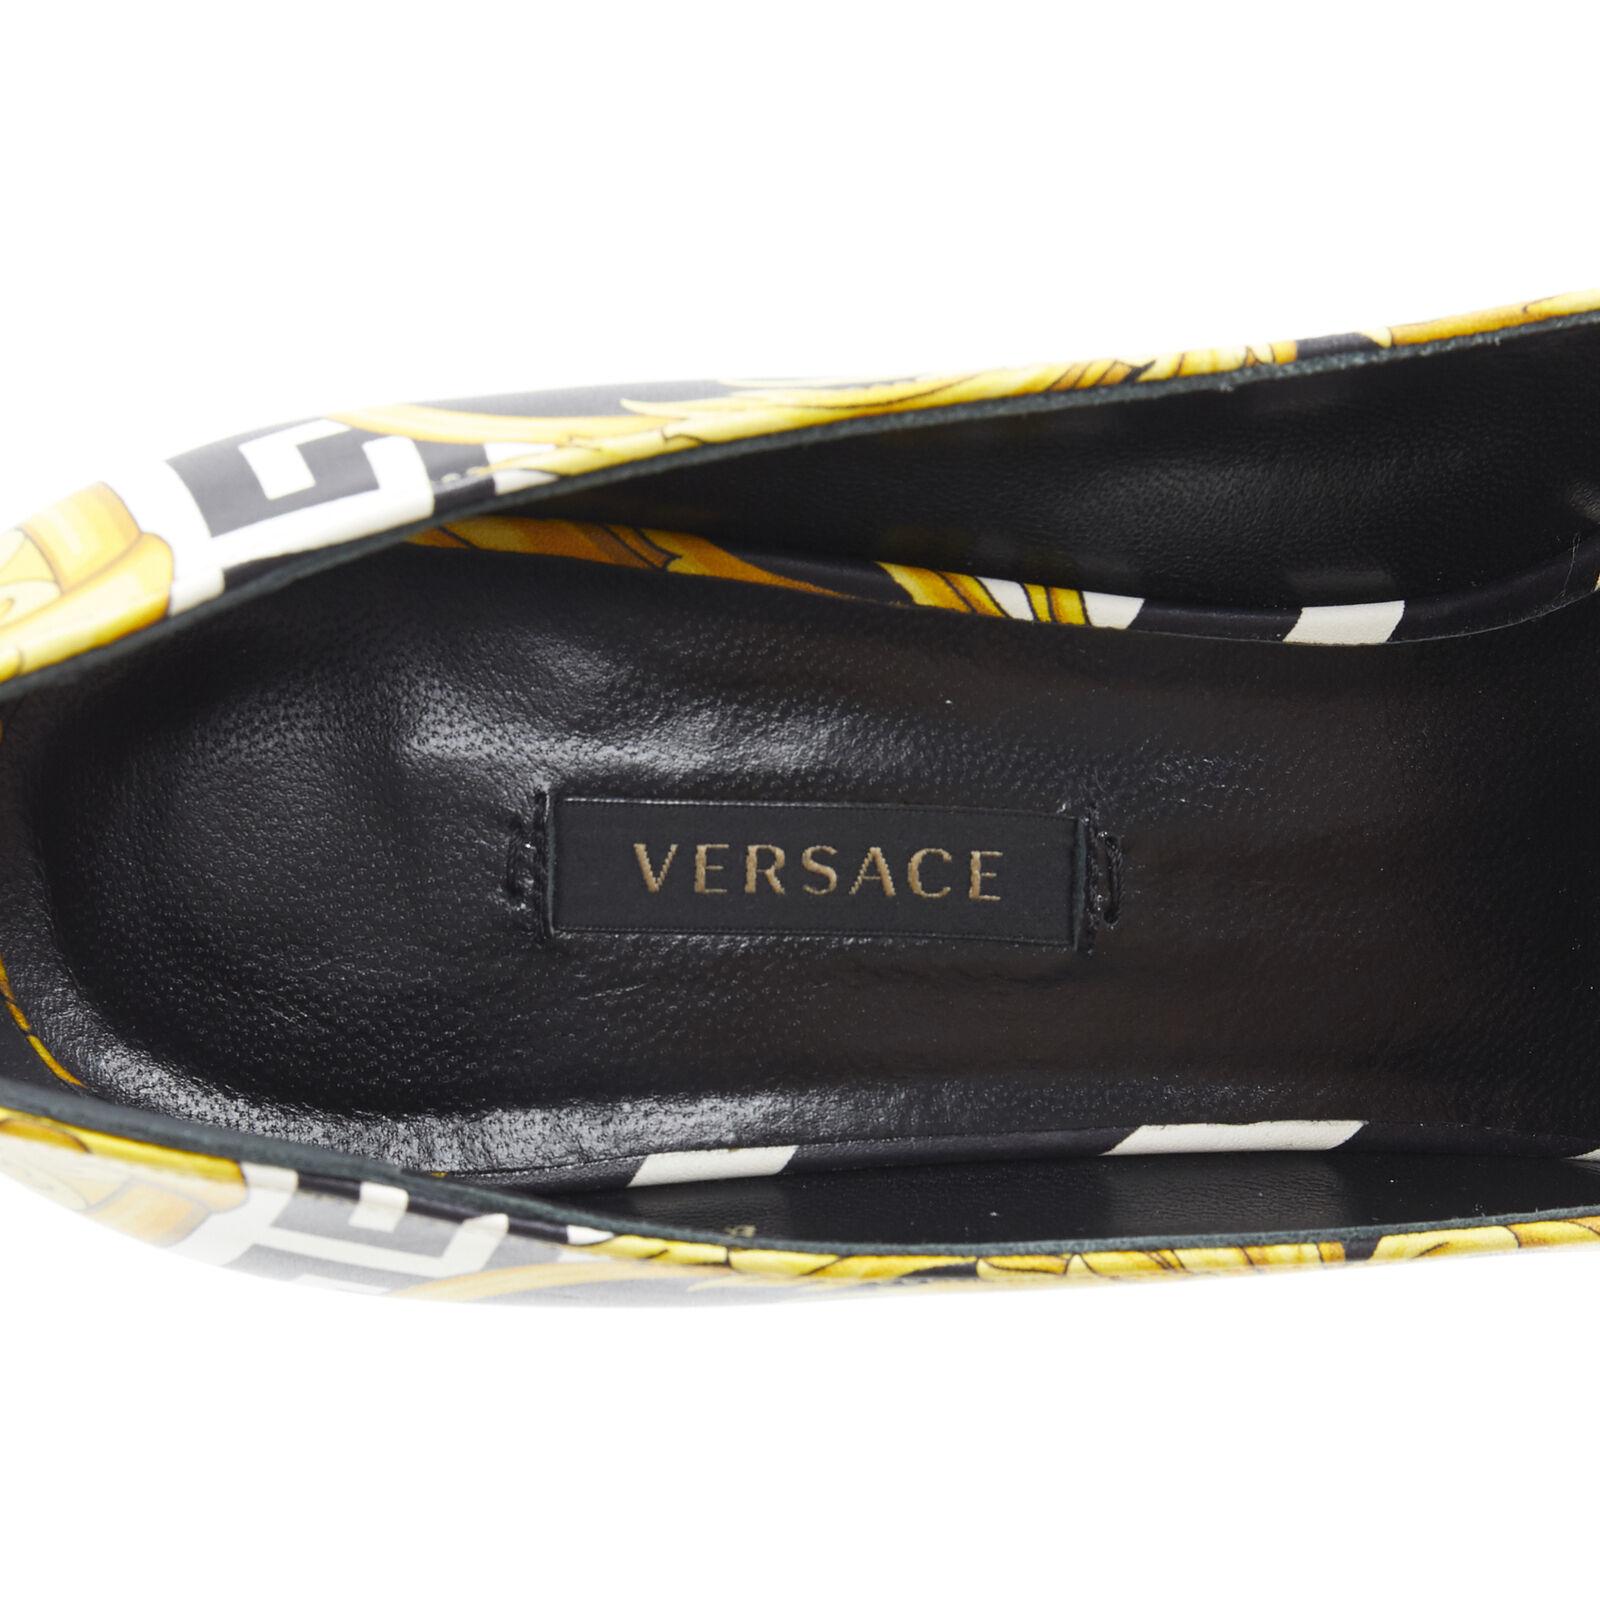 new VERSACE Savage Wild Barocco gold white Medusa strap pointy leather heel EU40 For Sale 6